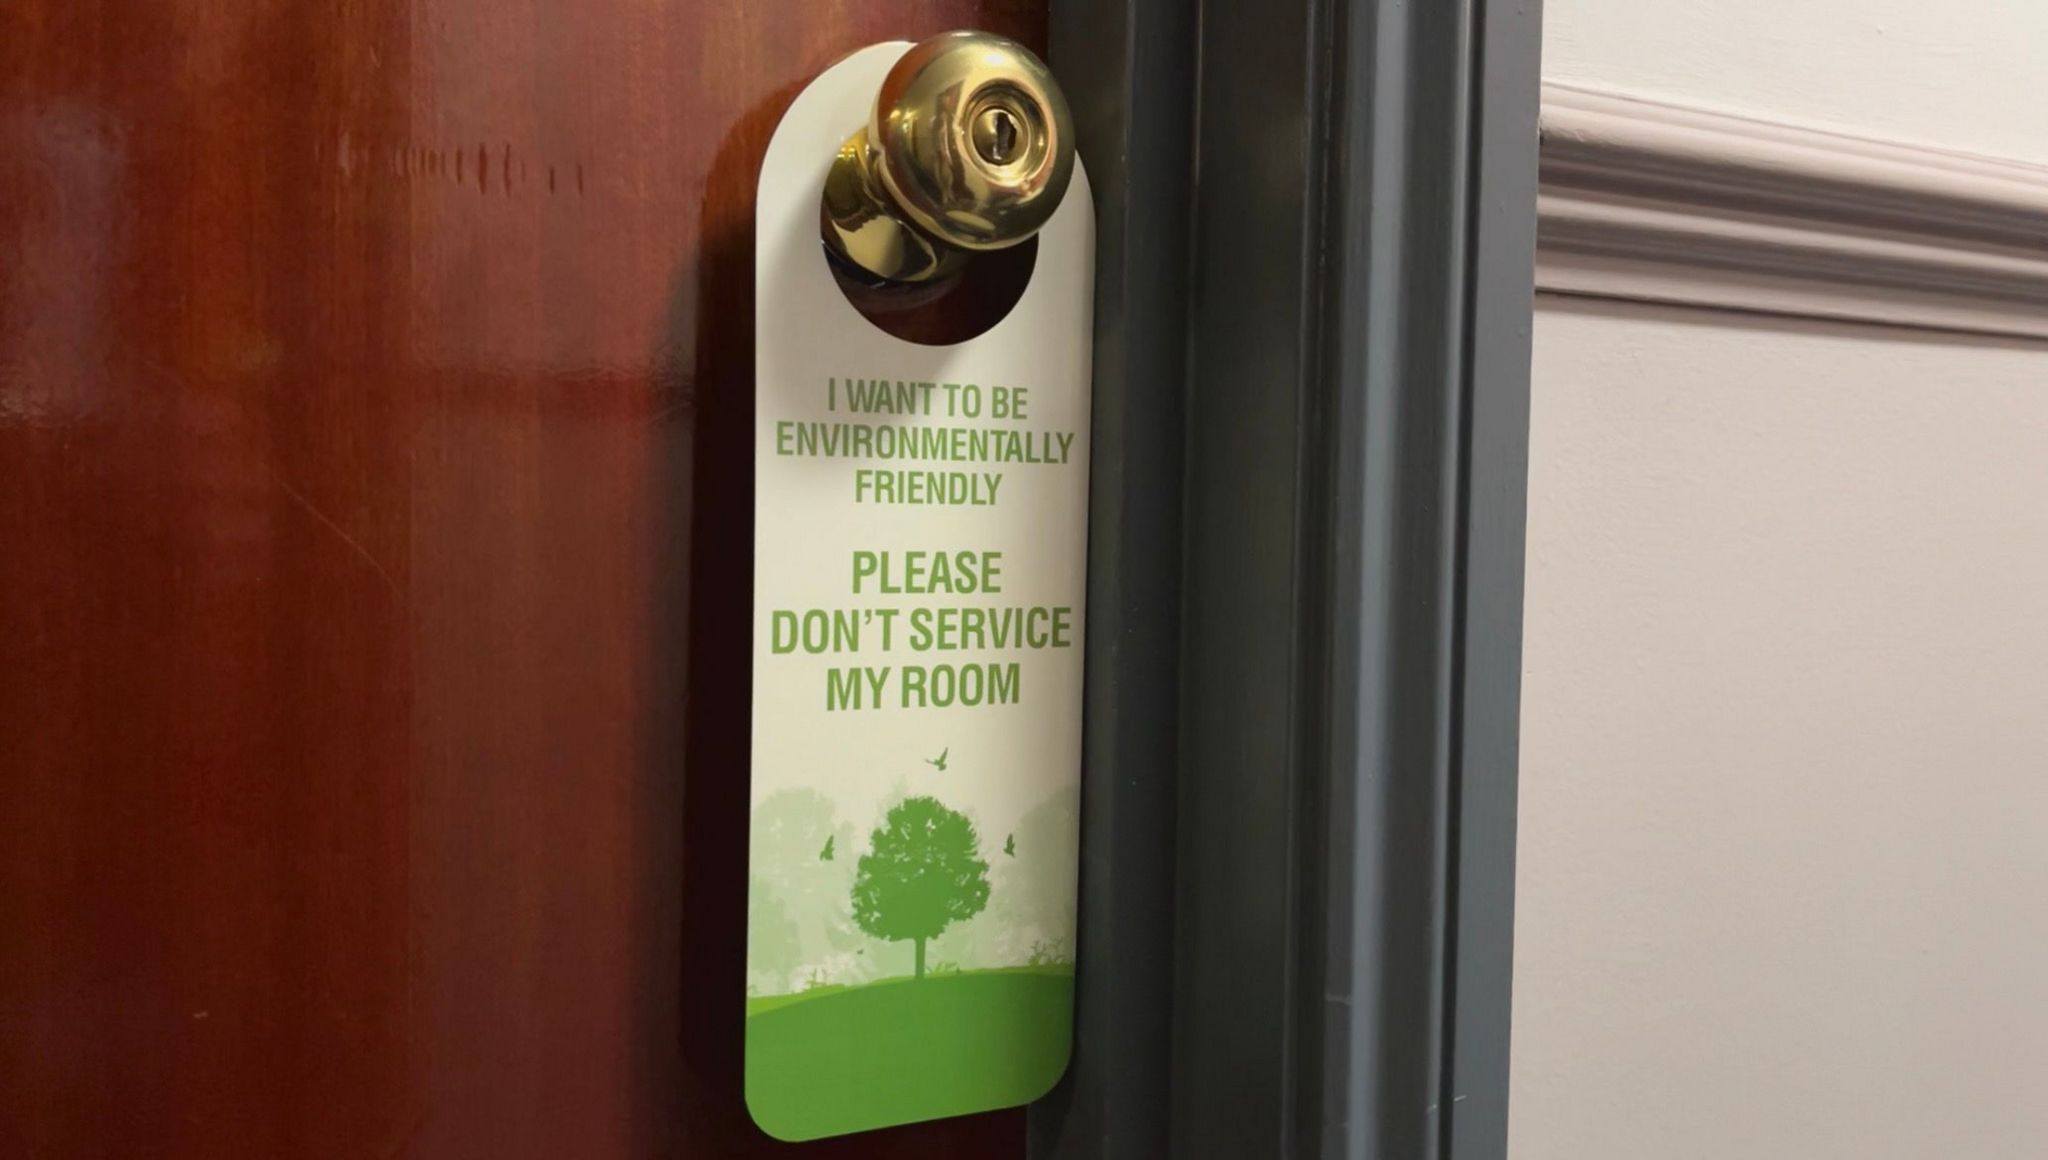 A door handle sign that says 'I want to be environmentally friendly. Please don't service my room' hanging on a door